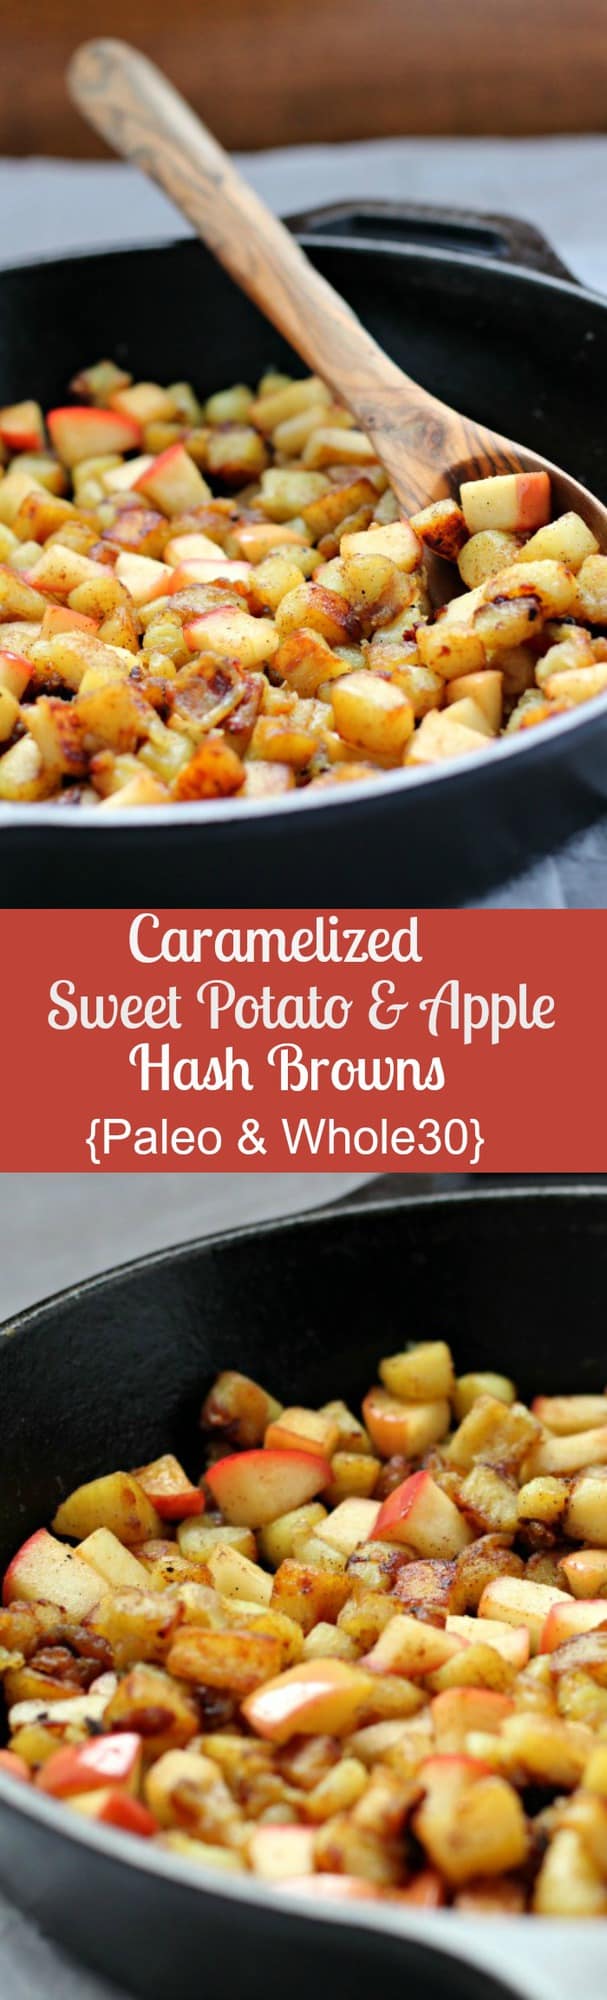 Caramelized sweet potato and apple hash browns - paleo and whole30 - make with a white or orange sweet potato - so simple and incredibly delicious!